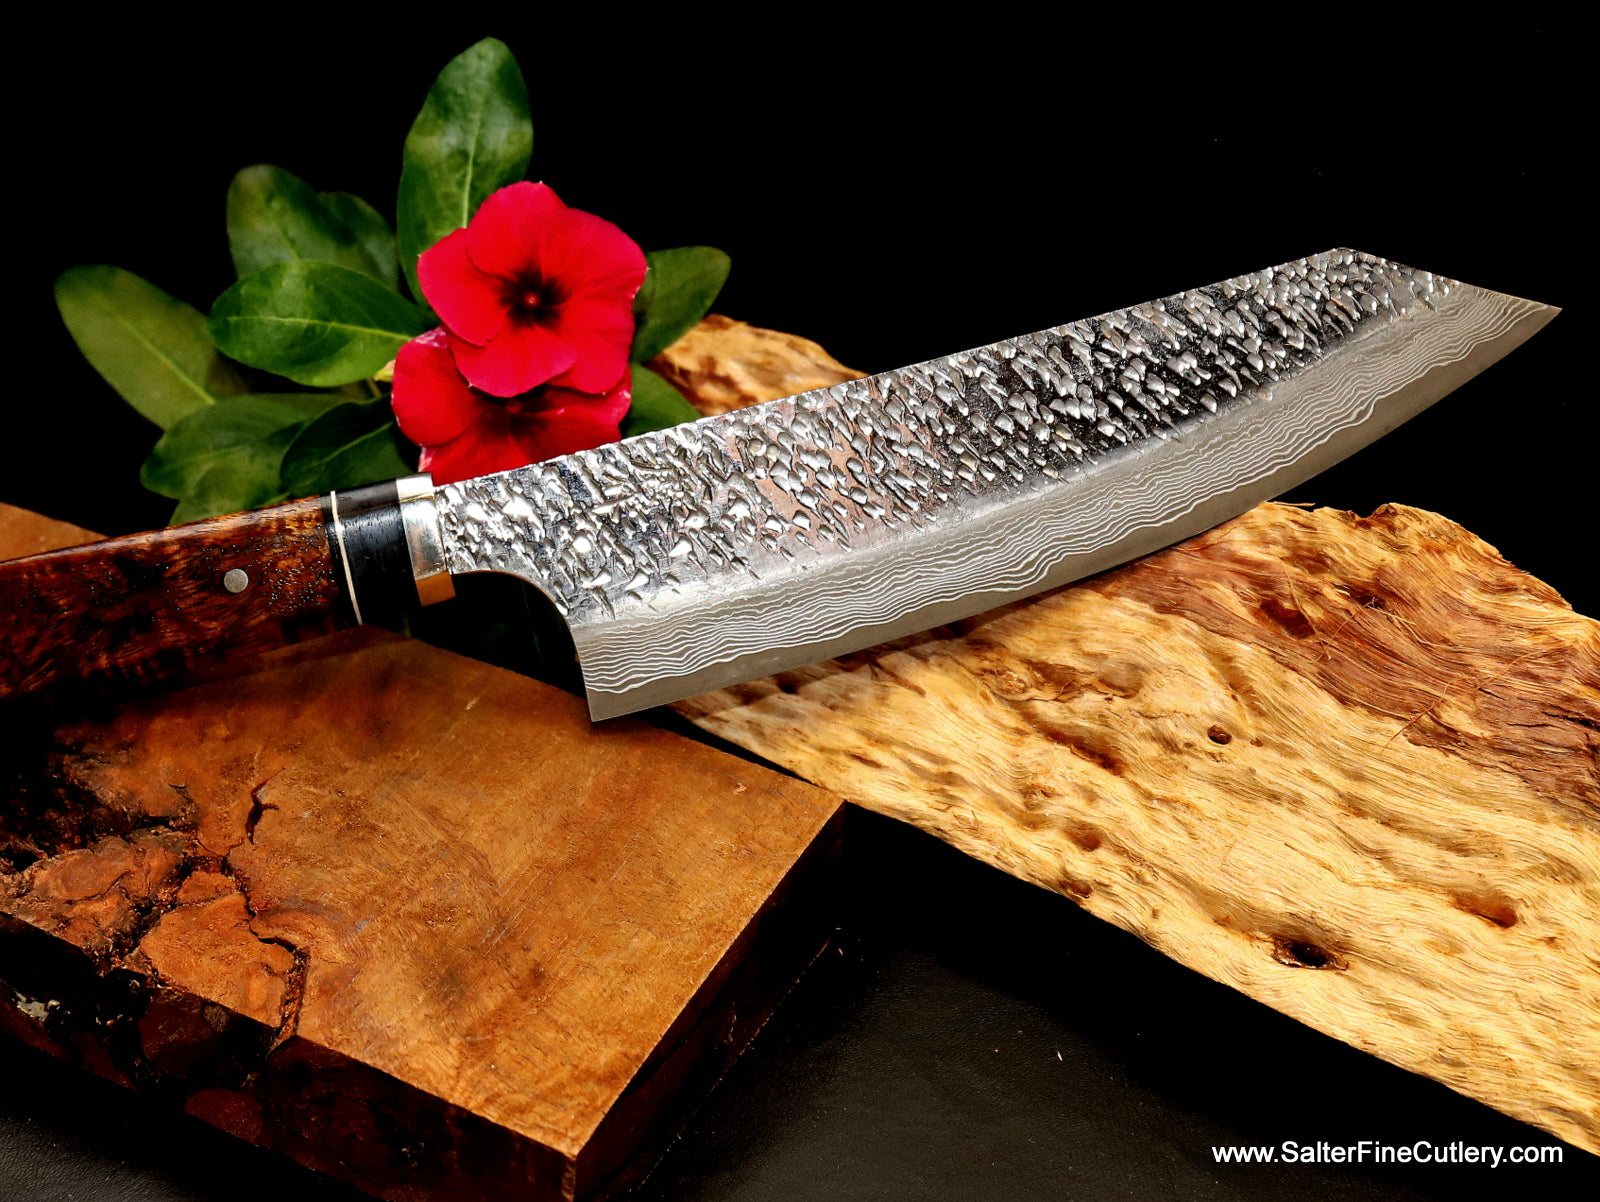 Raptor design series chef knives available as individual knives or in sets from Salter Fine Cutlery of Hawaii